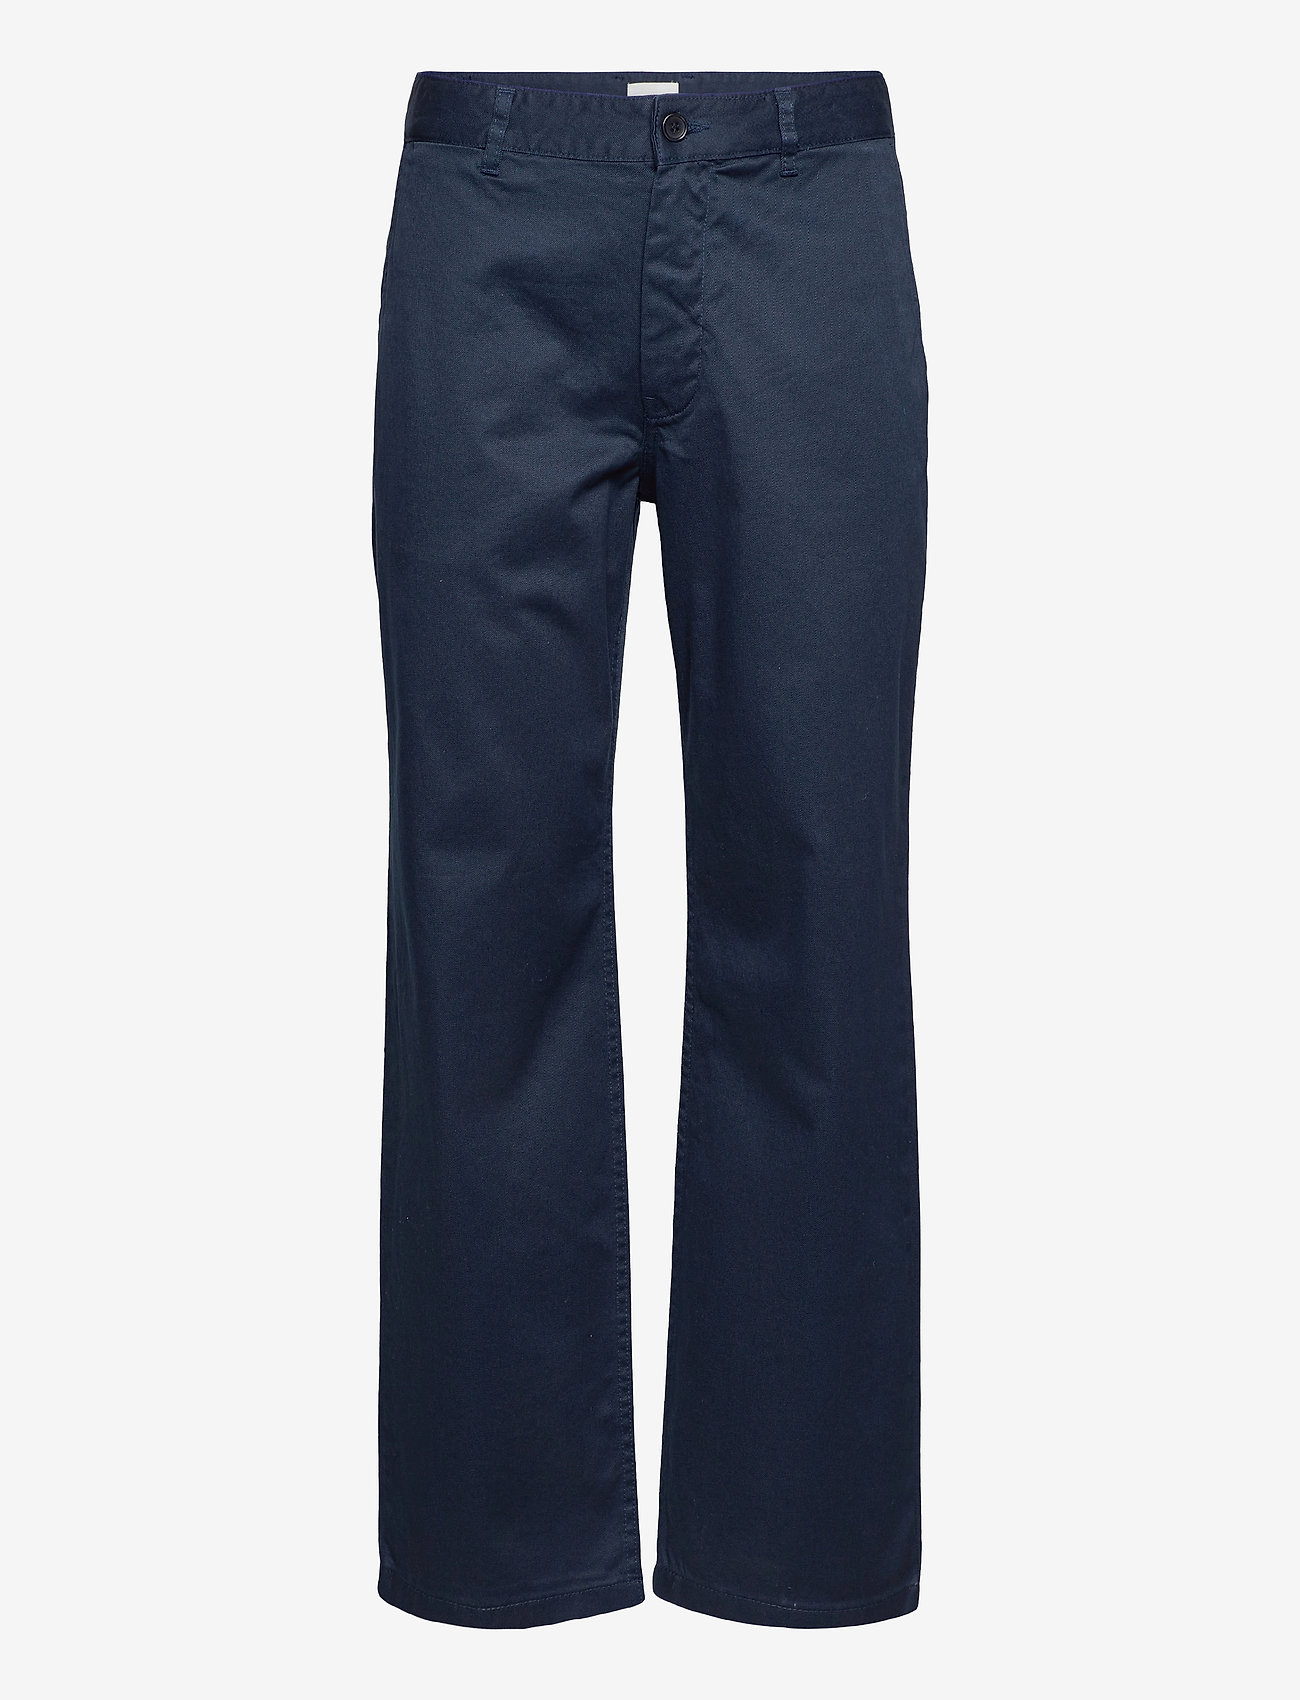 Wood Wood - Stefan classic trousers - chino's - navy - 0